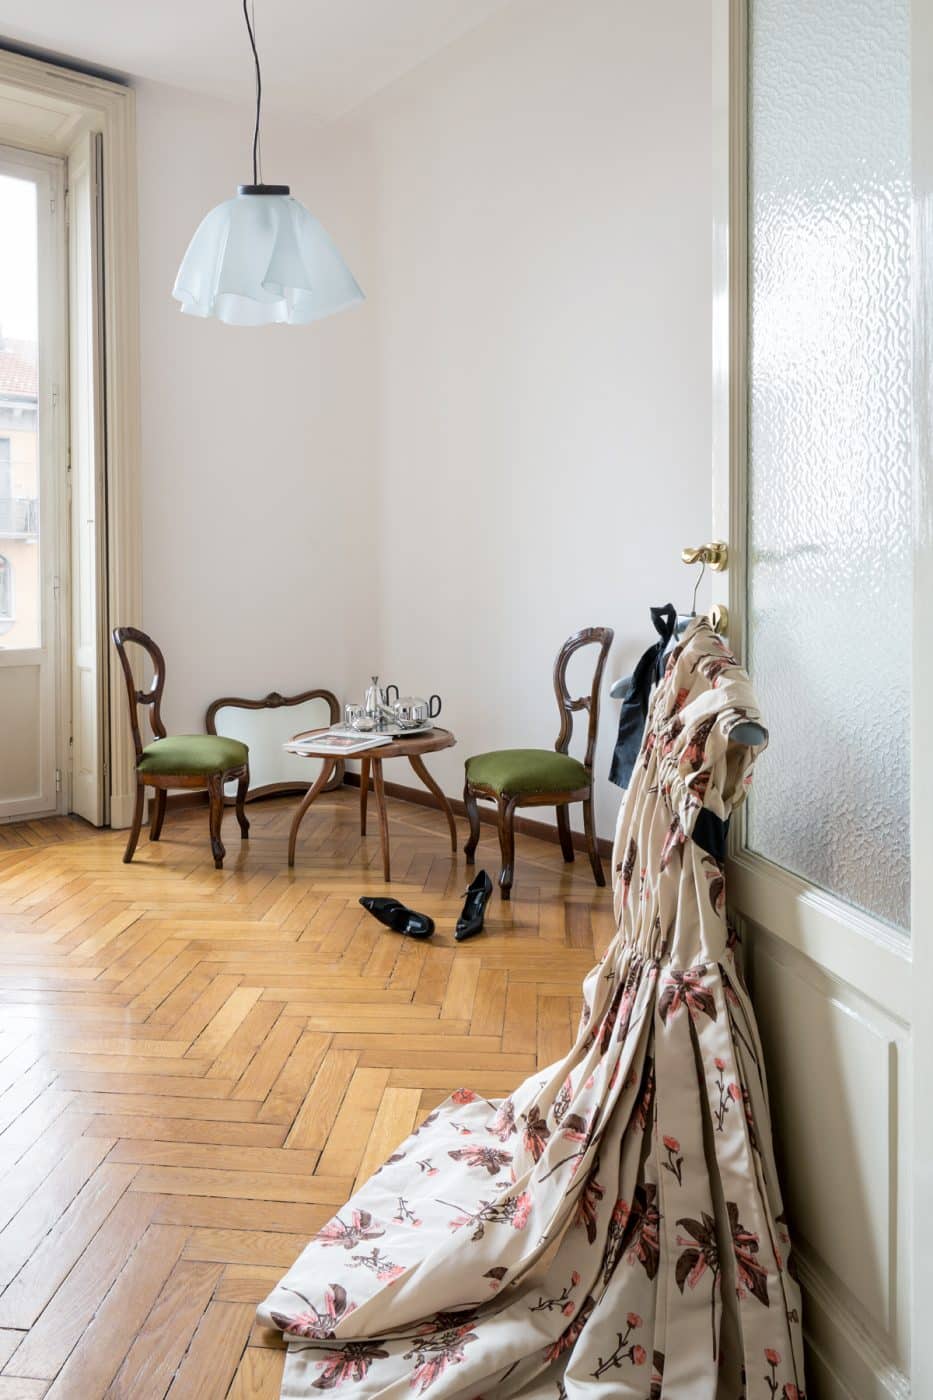 A view of Jenny Walton's Milan apartment with a cream-colored Prada dress with pink flowers hanging from a door handle, a 1960s wood-framed mirror against the wall, two baroque Italian chair with green upholstered seats and an Osvaldo Borsani cocktail table holding a silver-plated tray 